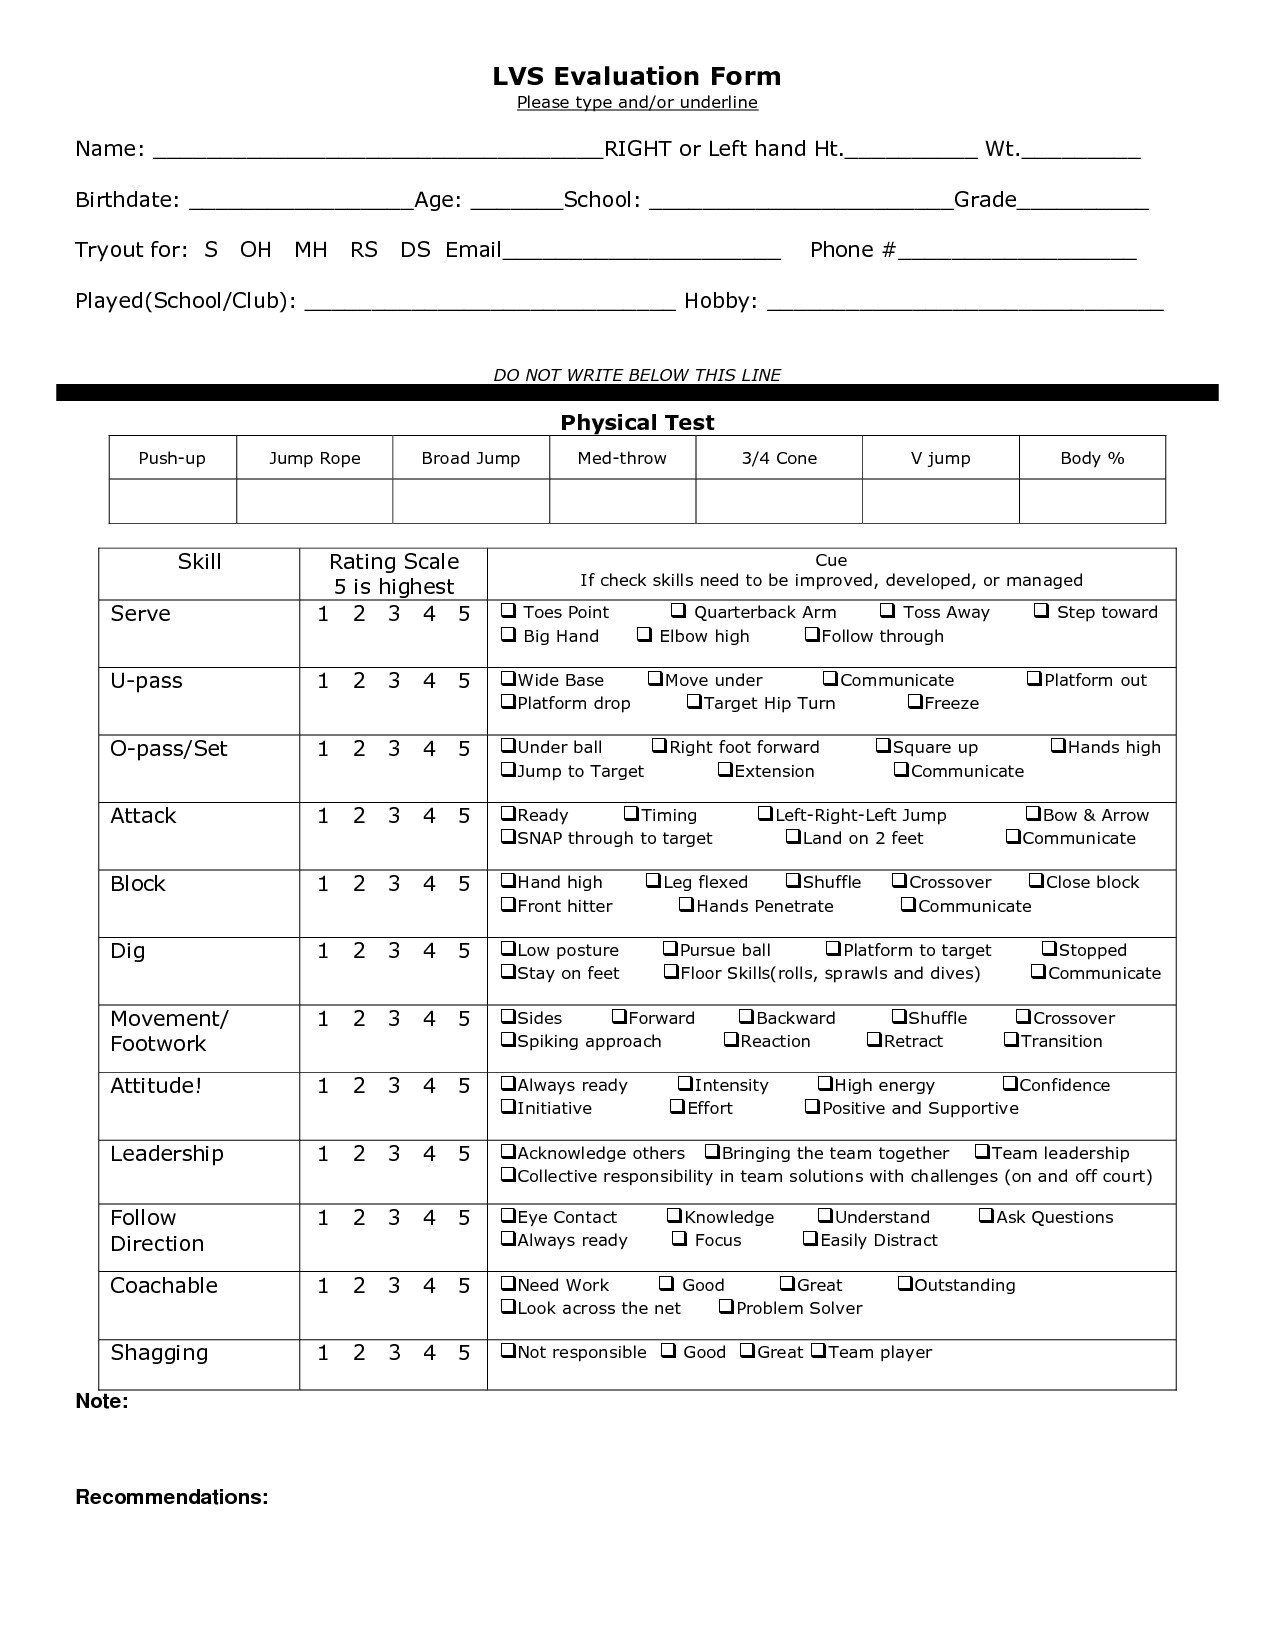 Basketball Player Evaluation form Volleyball Tryout Evaluation form Volleyball